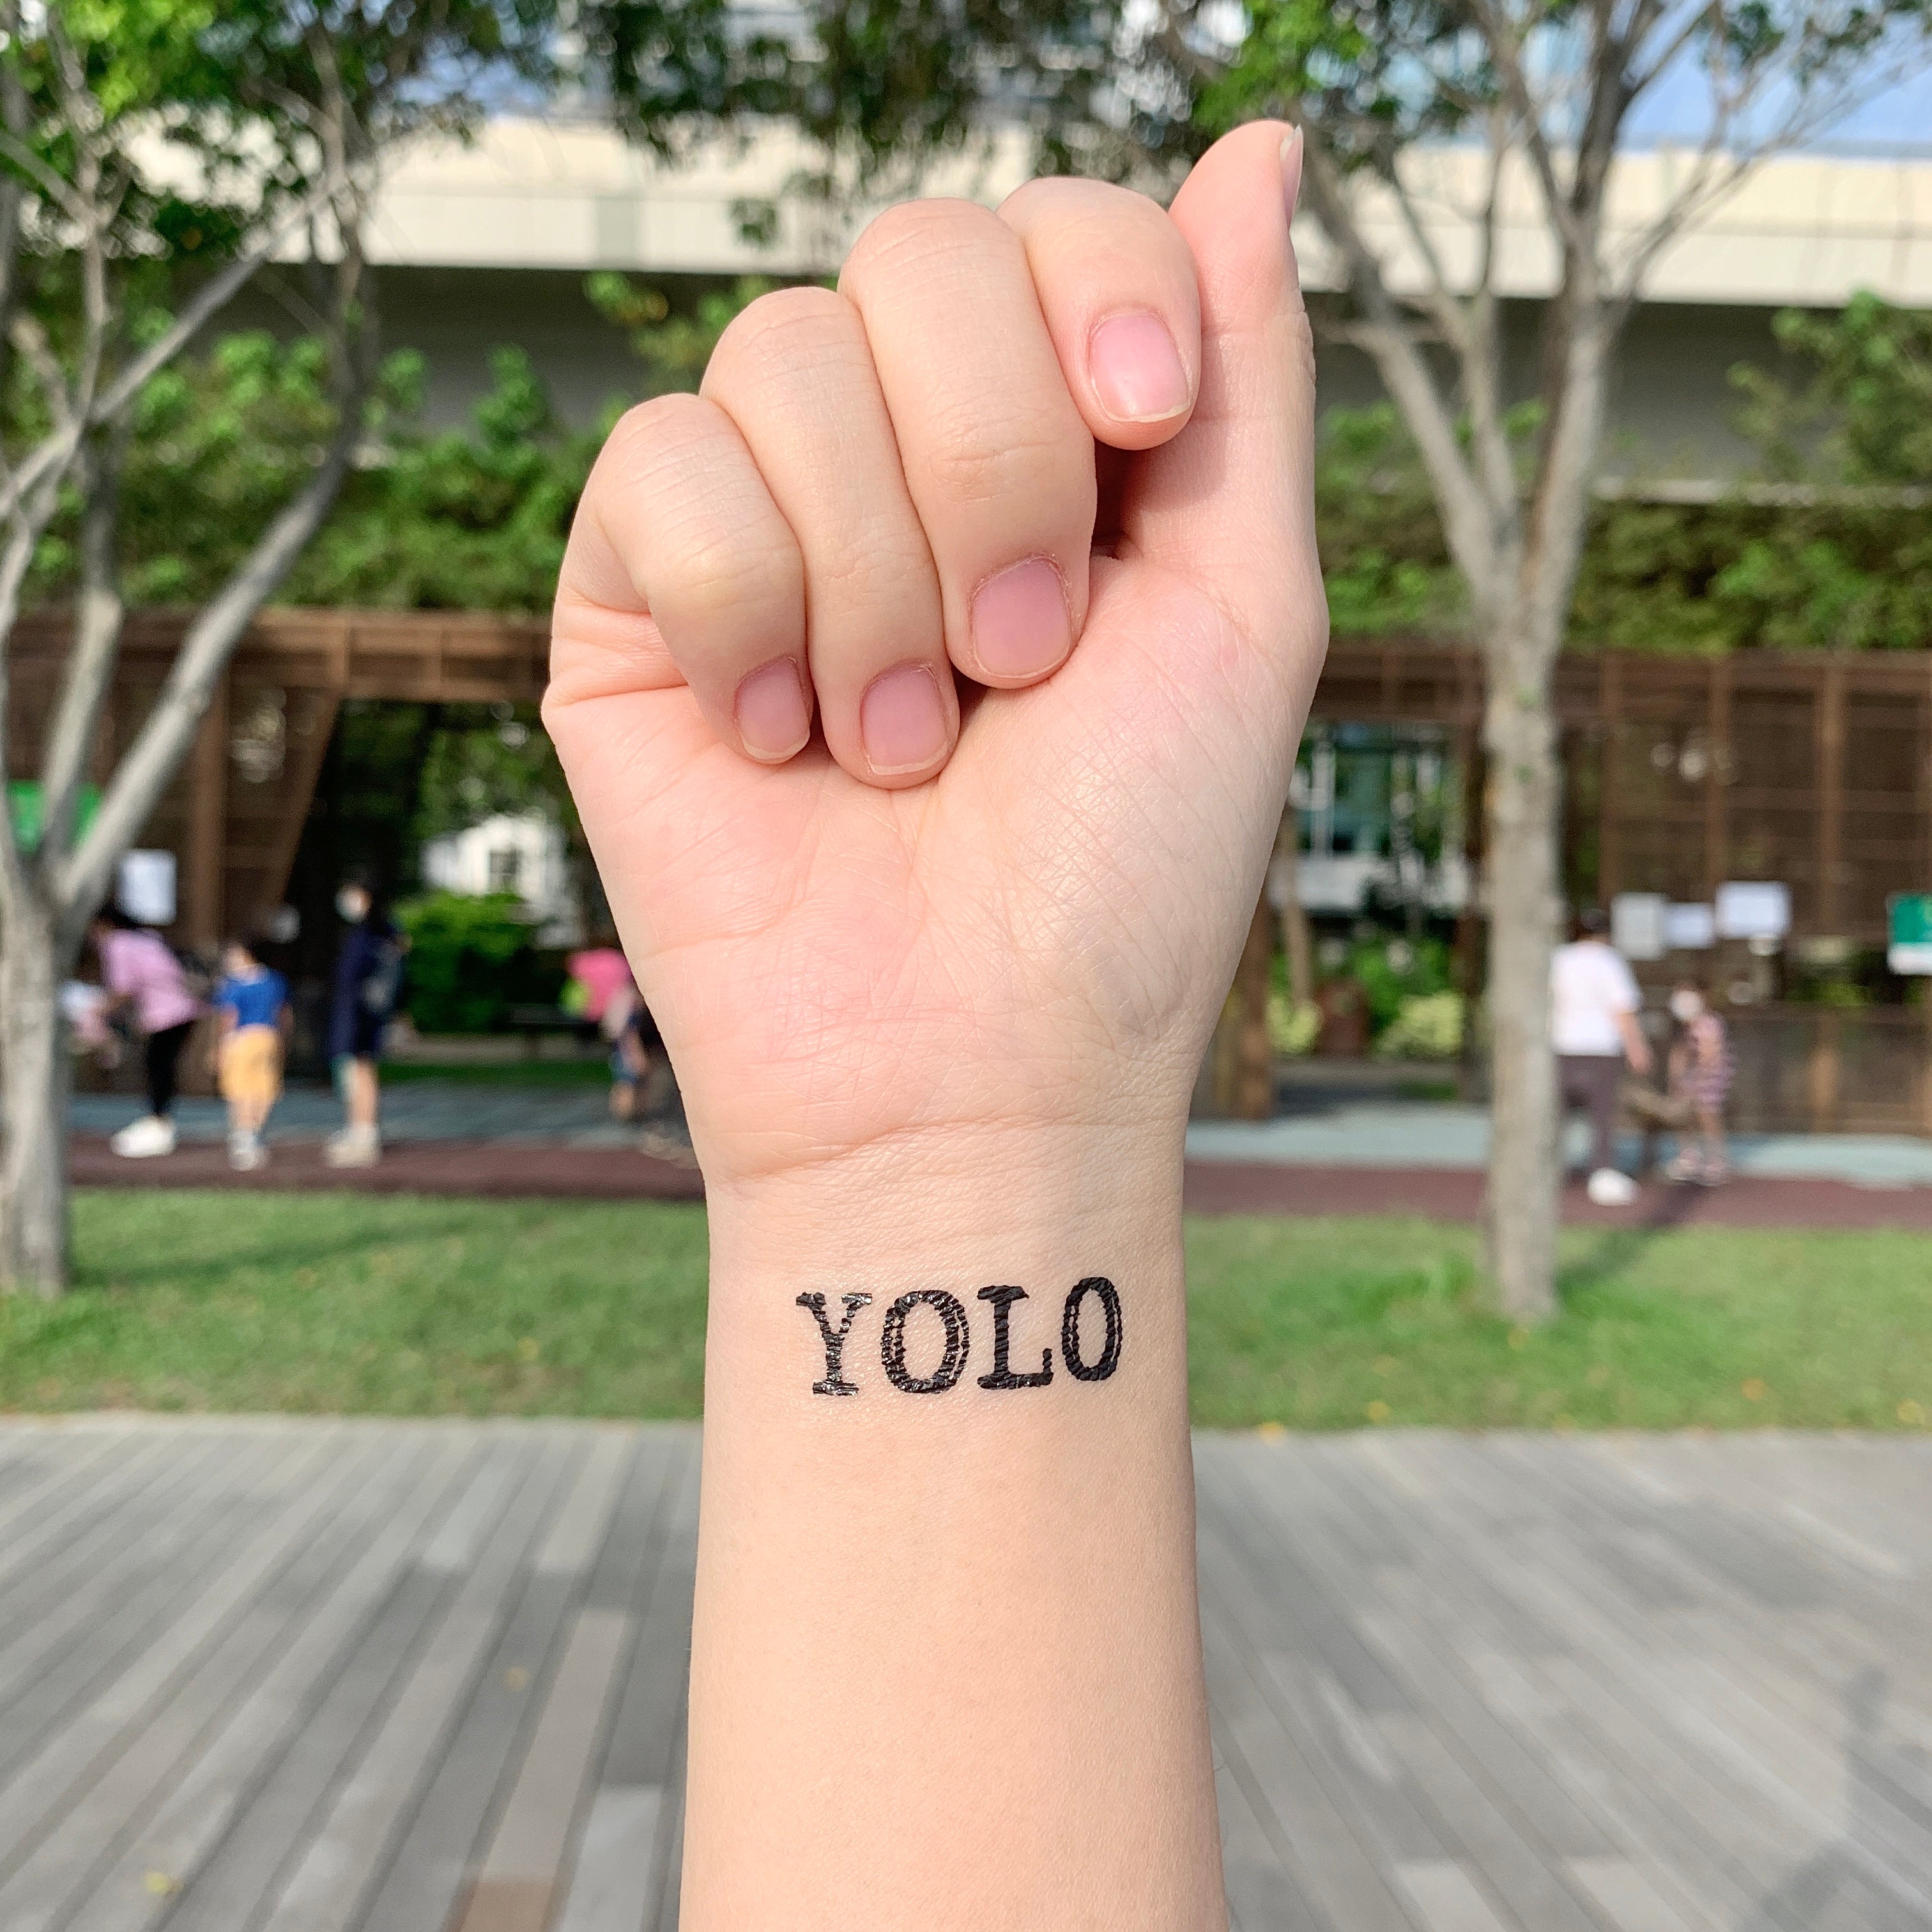 20 yolo tattoo designs that will inspire you to live life to the fullest